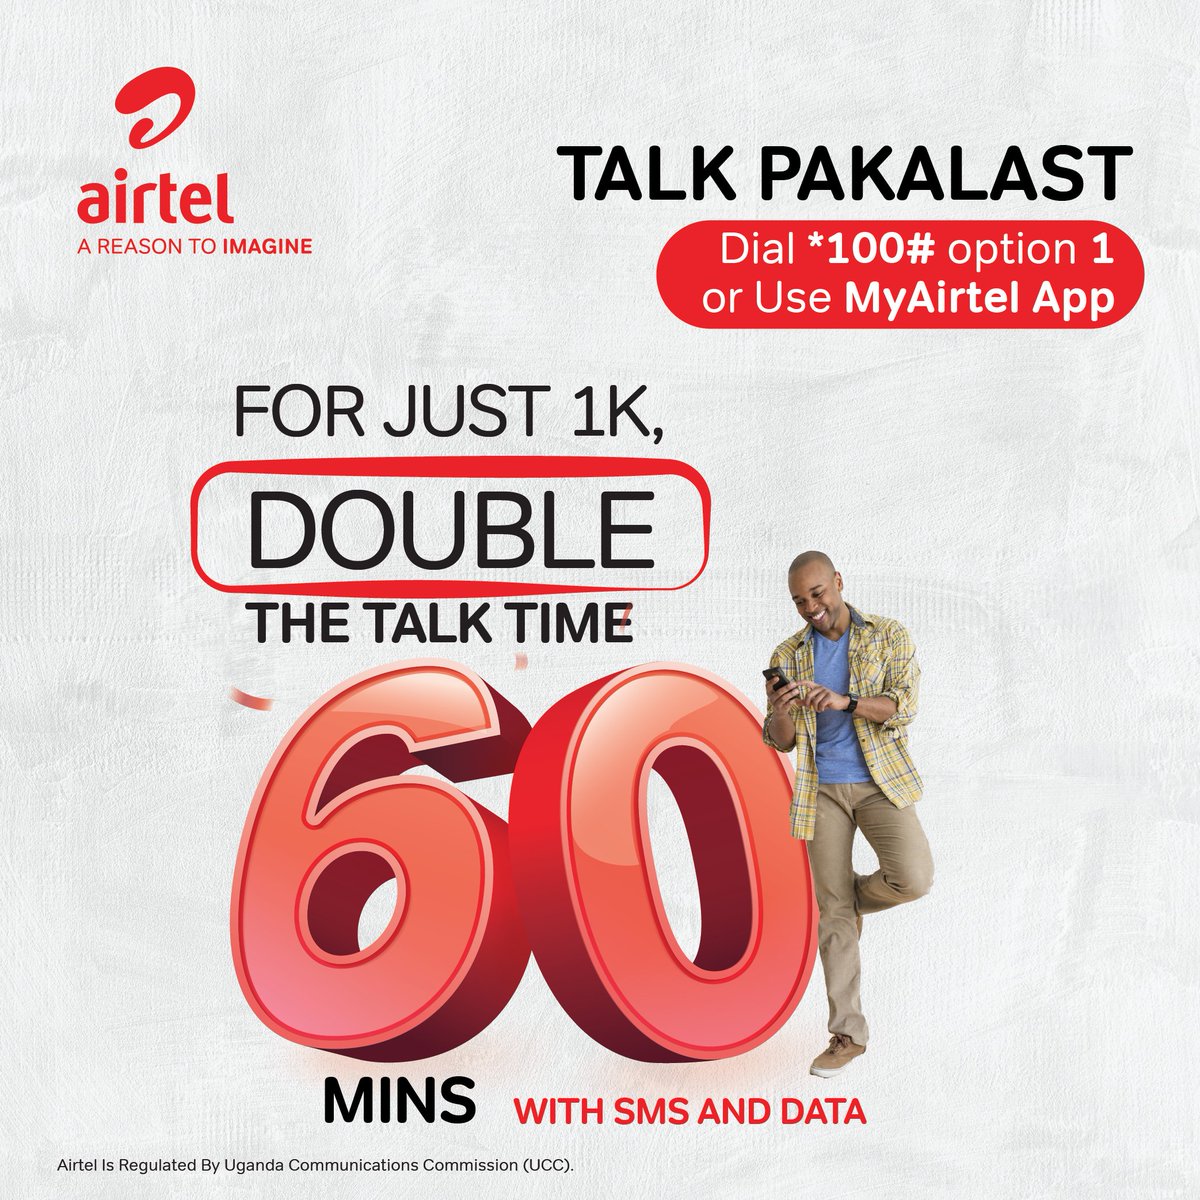 Start your week off with double talk time from Airtel. For only Shs. 1,000, get 60 Mins to #TalkPakalast. You also enjoy Free 5MBs and 5SMS at no extra cost. Now that’s a deal. Dial *100# option 1 or visit #MyAirtelApp here bit.ly/3Oxancz to activate Pakalast today.